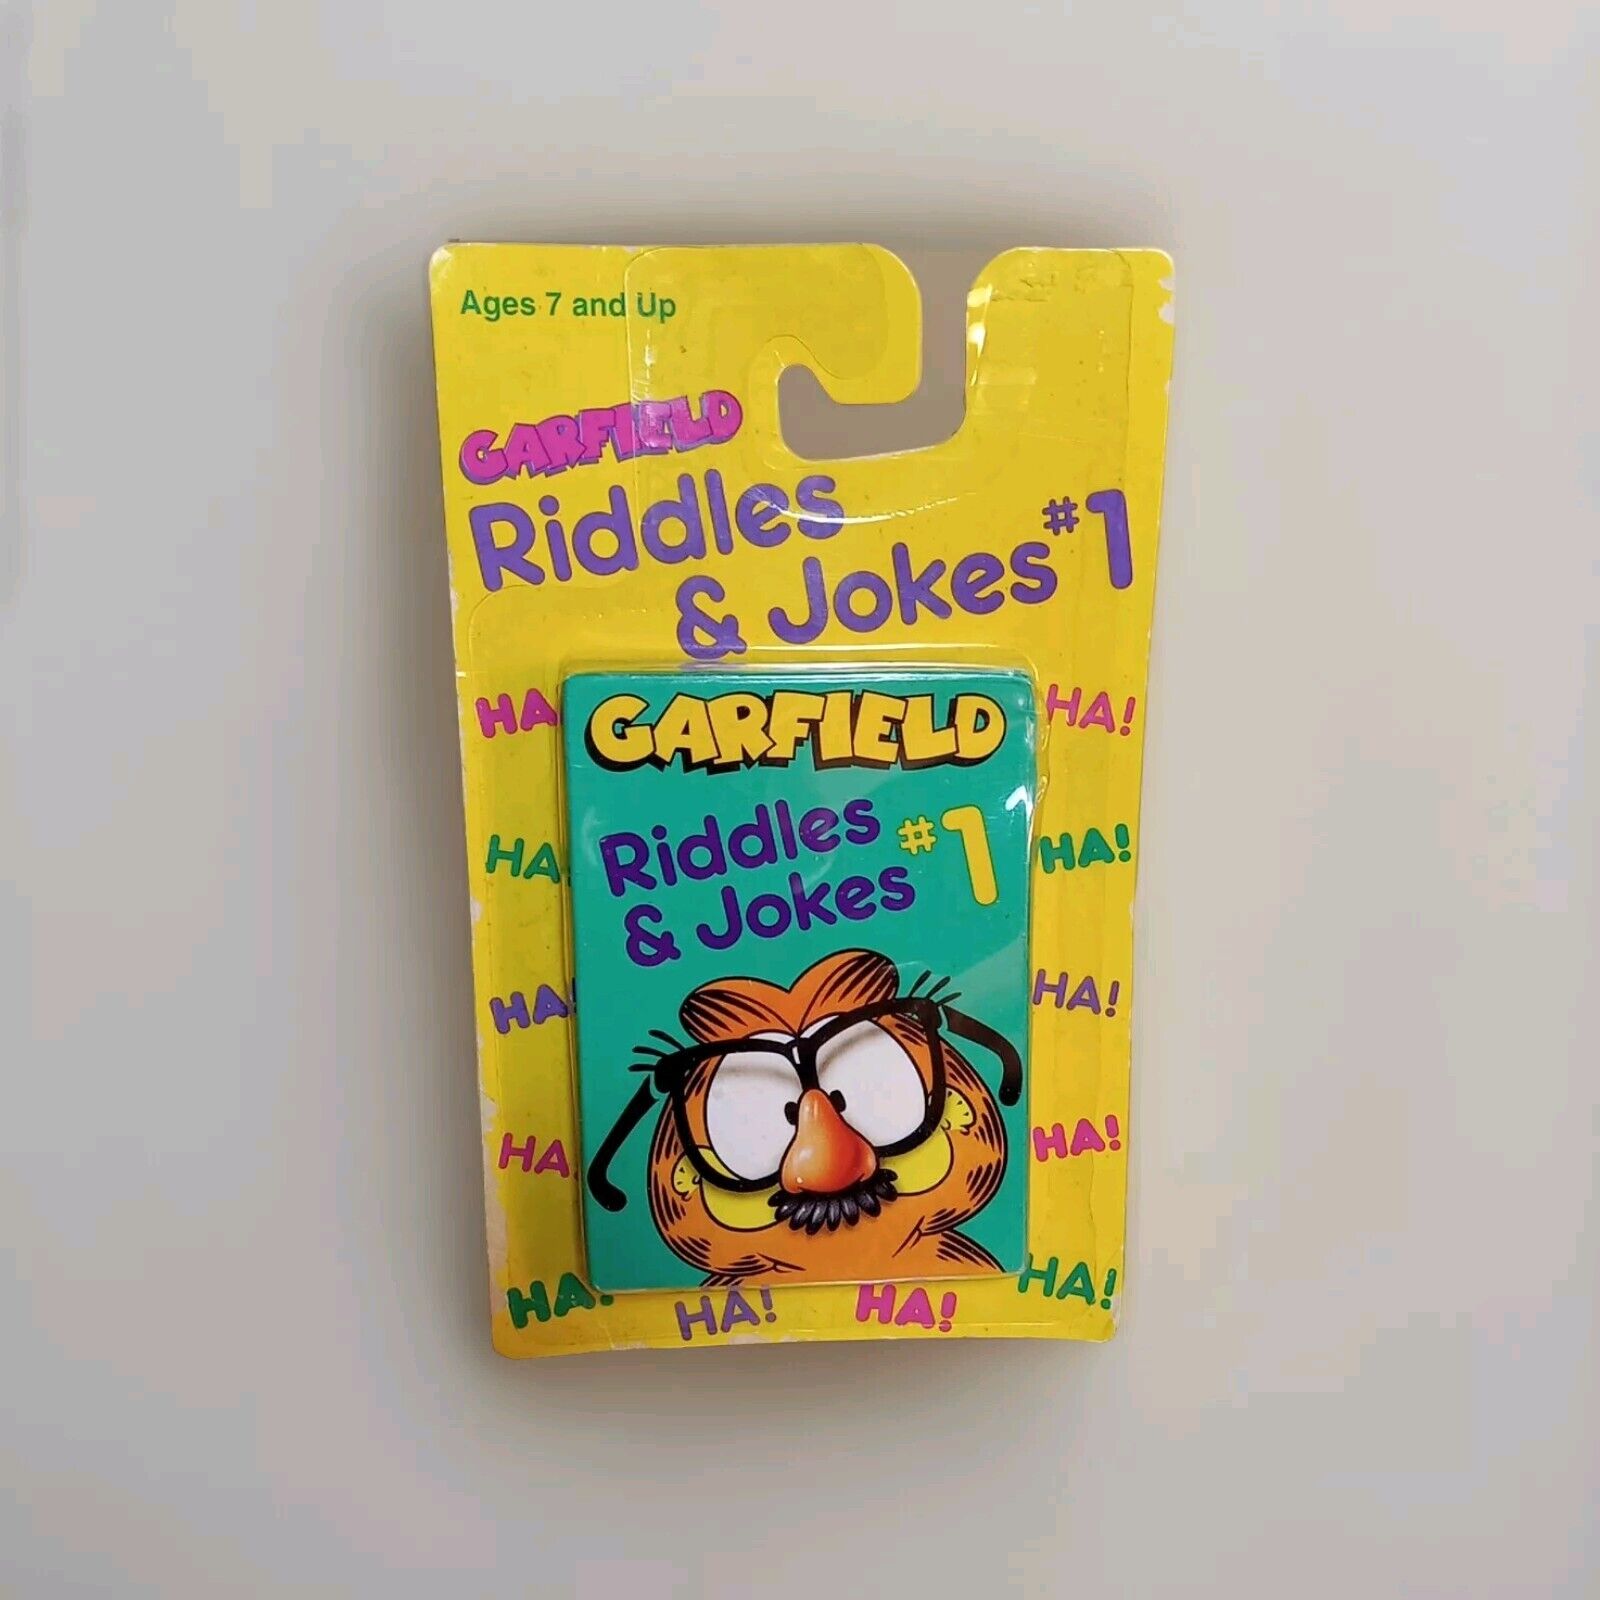 Vintage Bicycle Games Garfield the Cat Riddles & Jokes #1 Sealed 1978